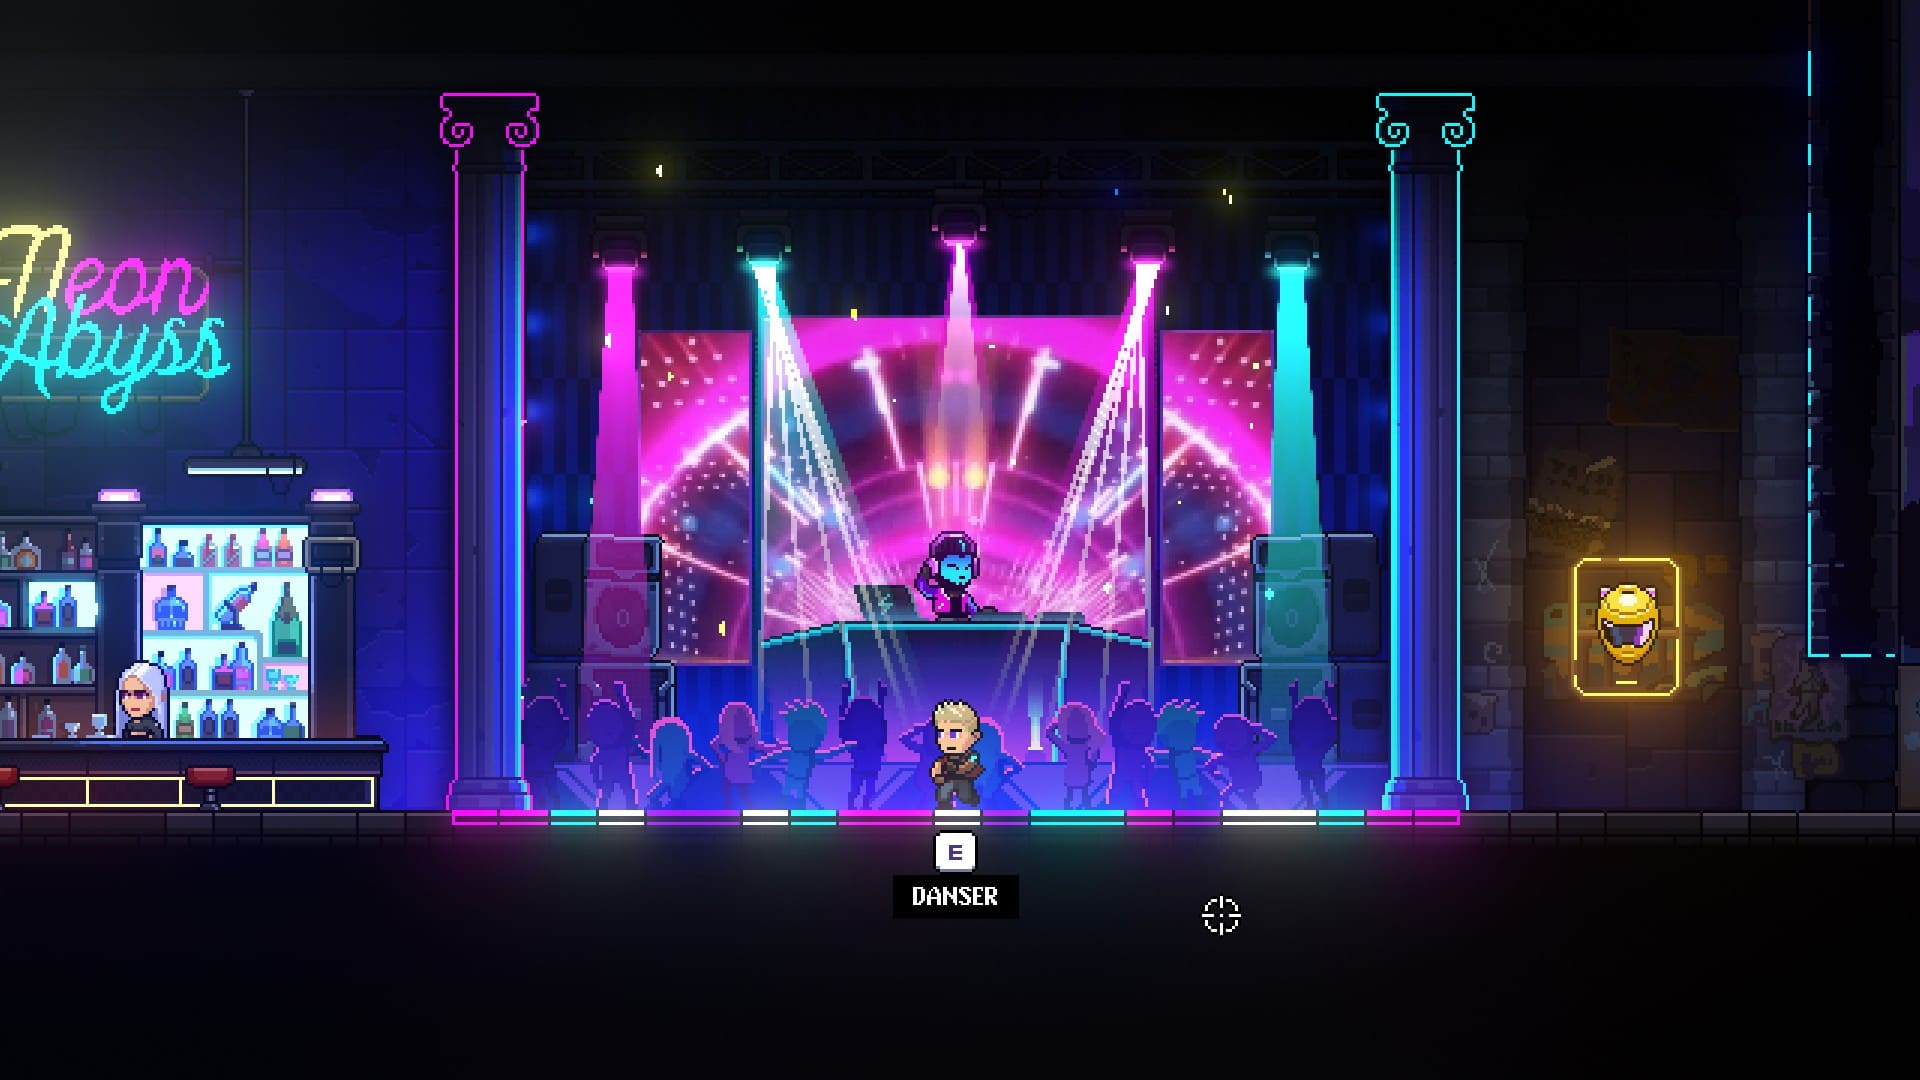 Neon Abyss for mac download